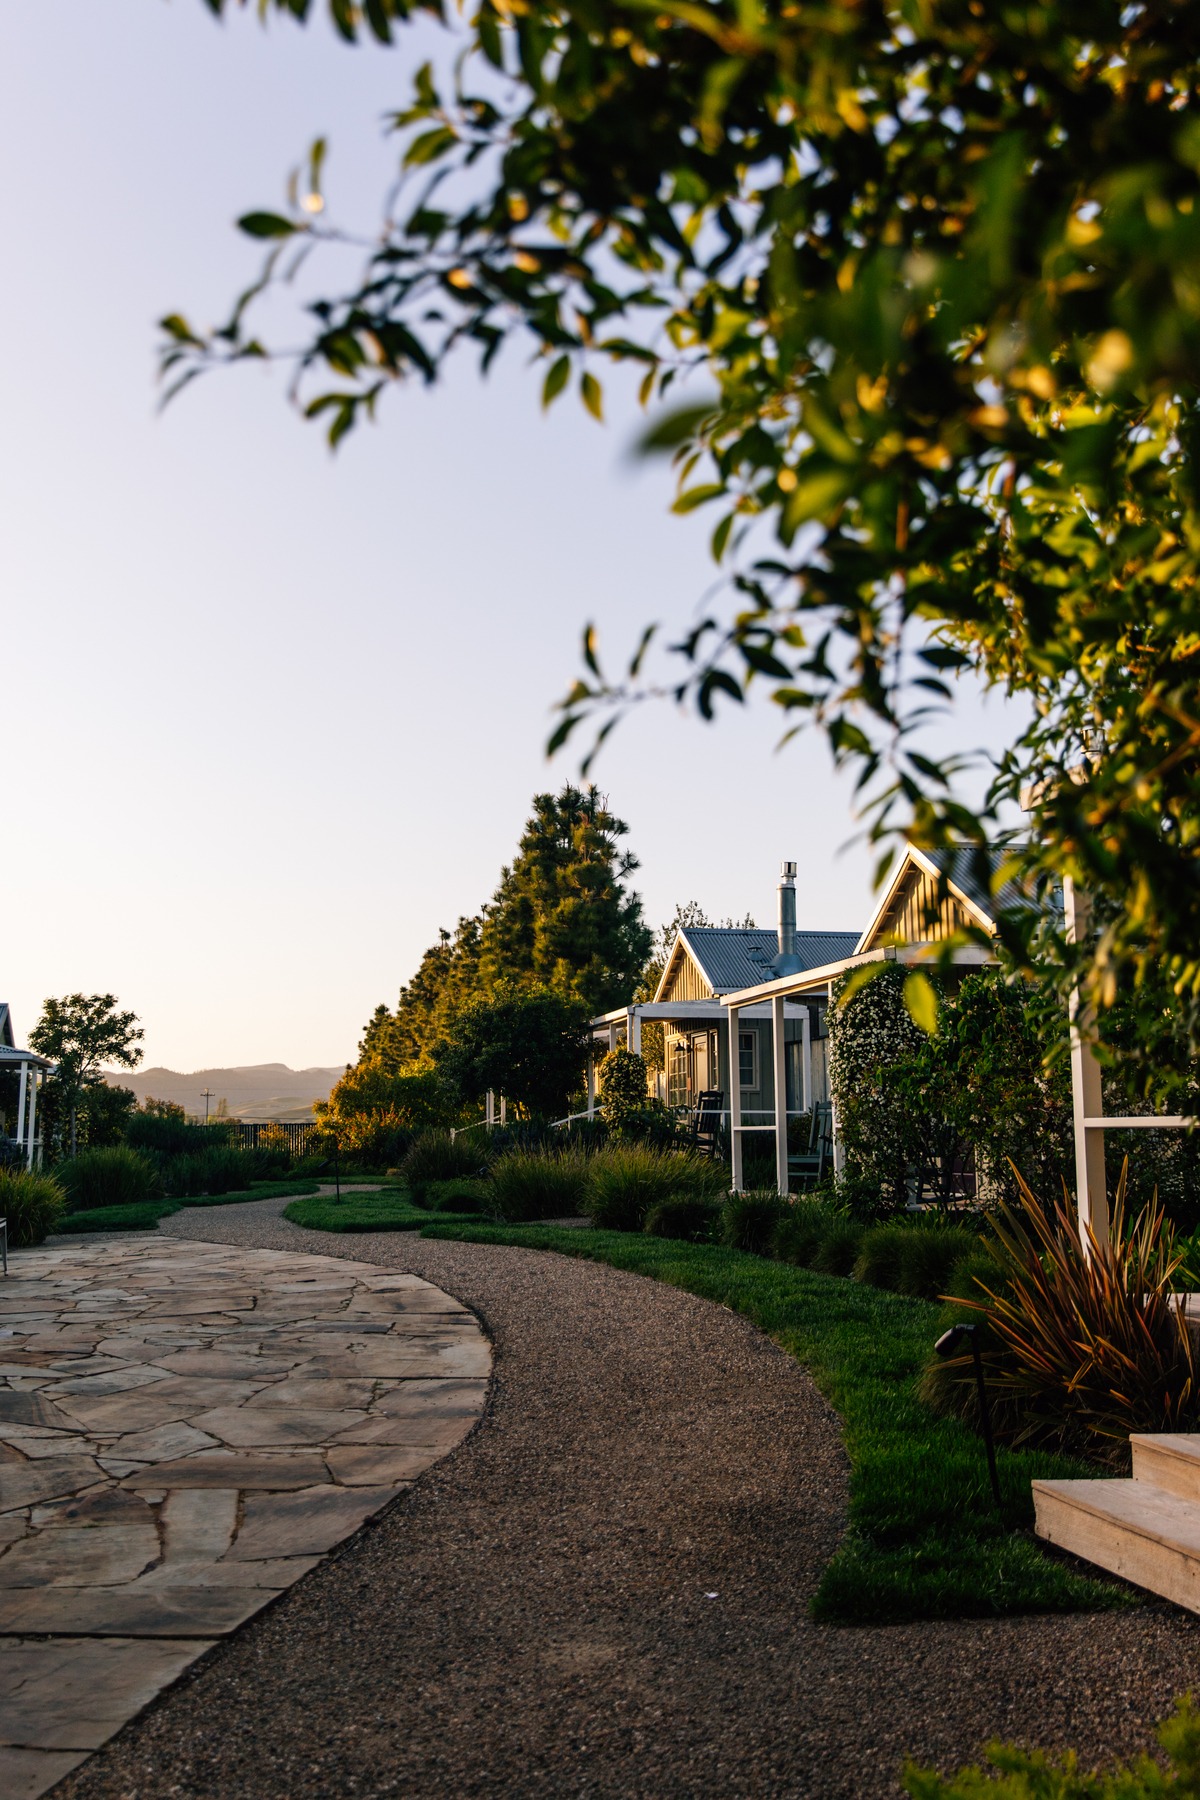 A stone path leading to a house Carneros Resort.